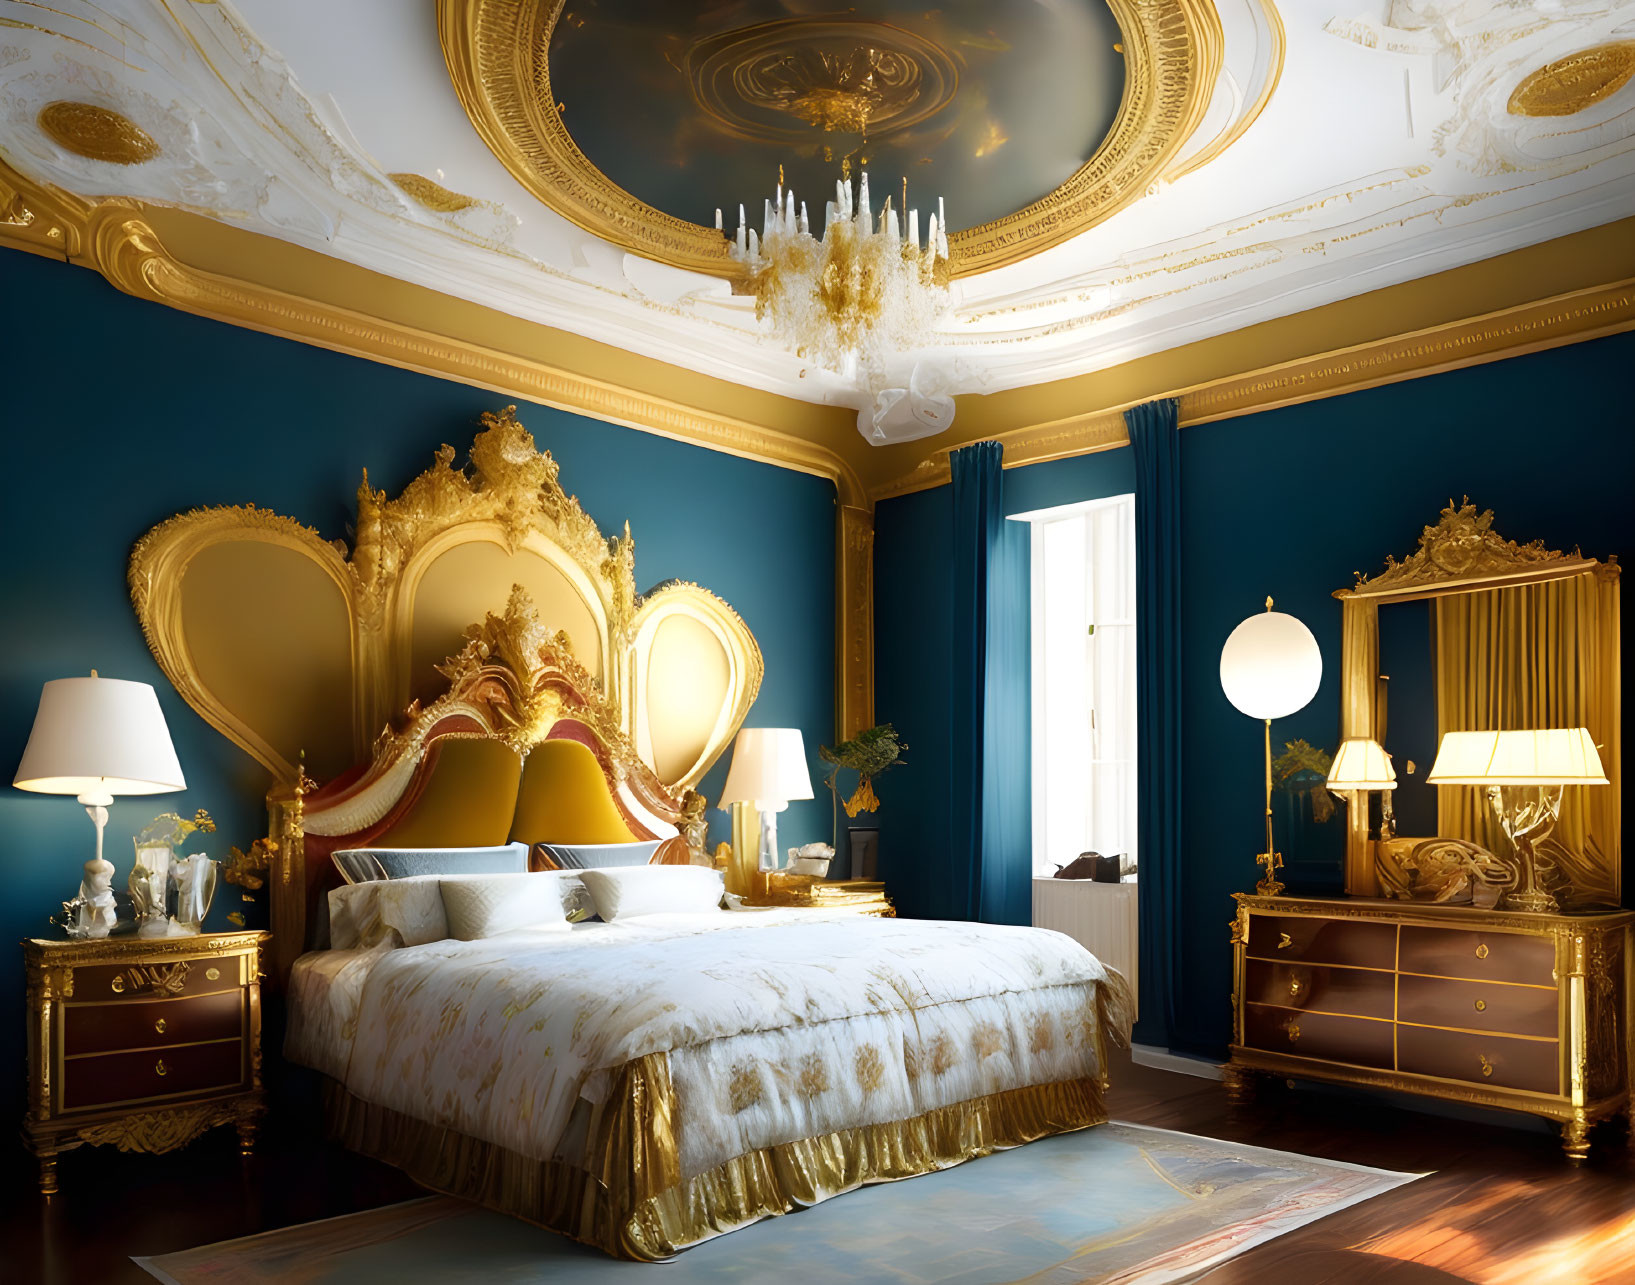 Luxurious bedroom with golden furniture, large bed, blue walls, white and gold ceiling